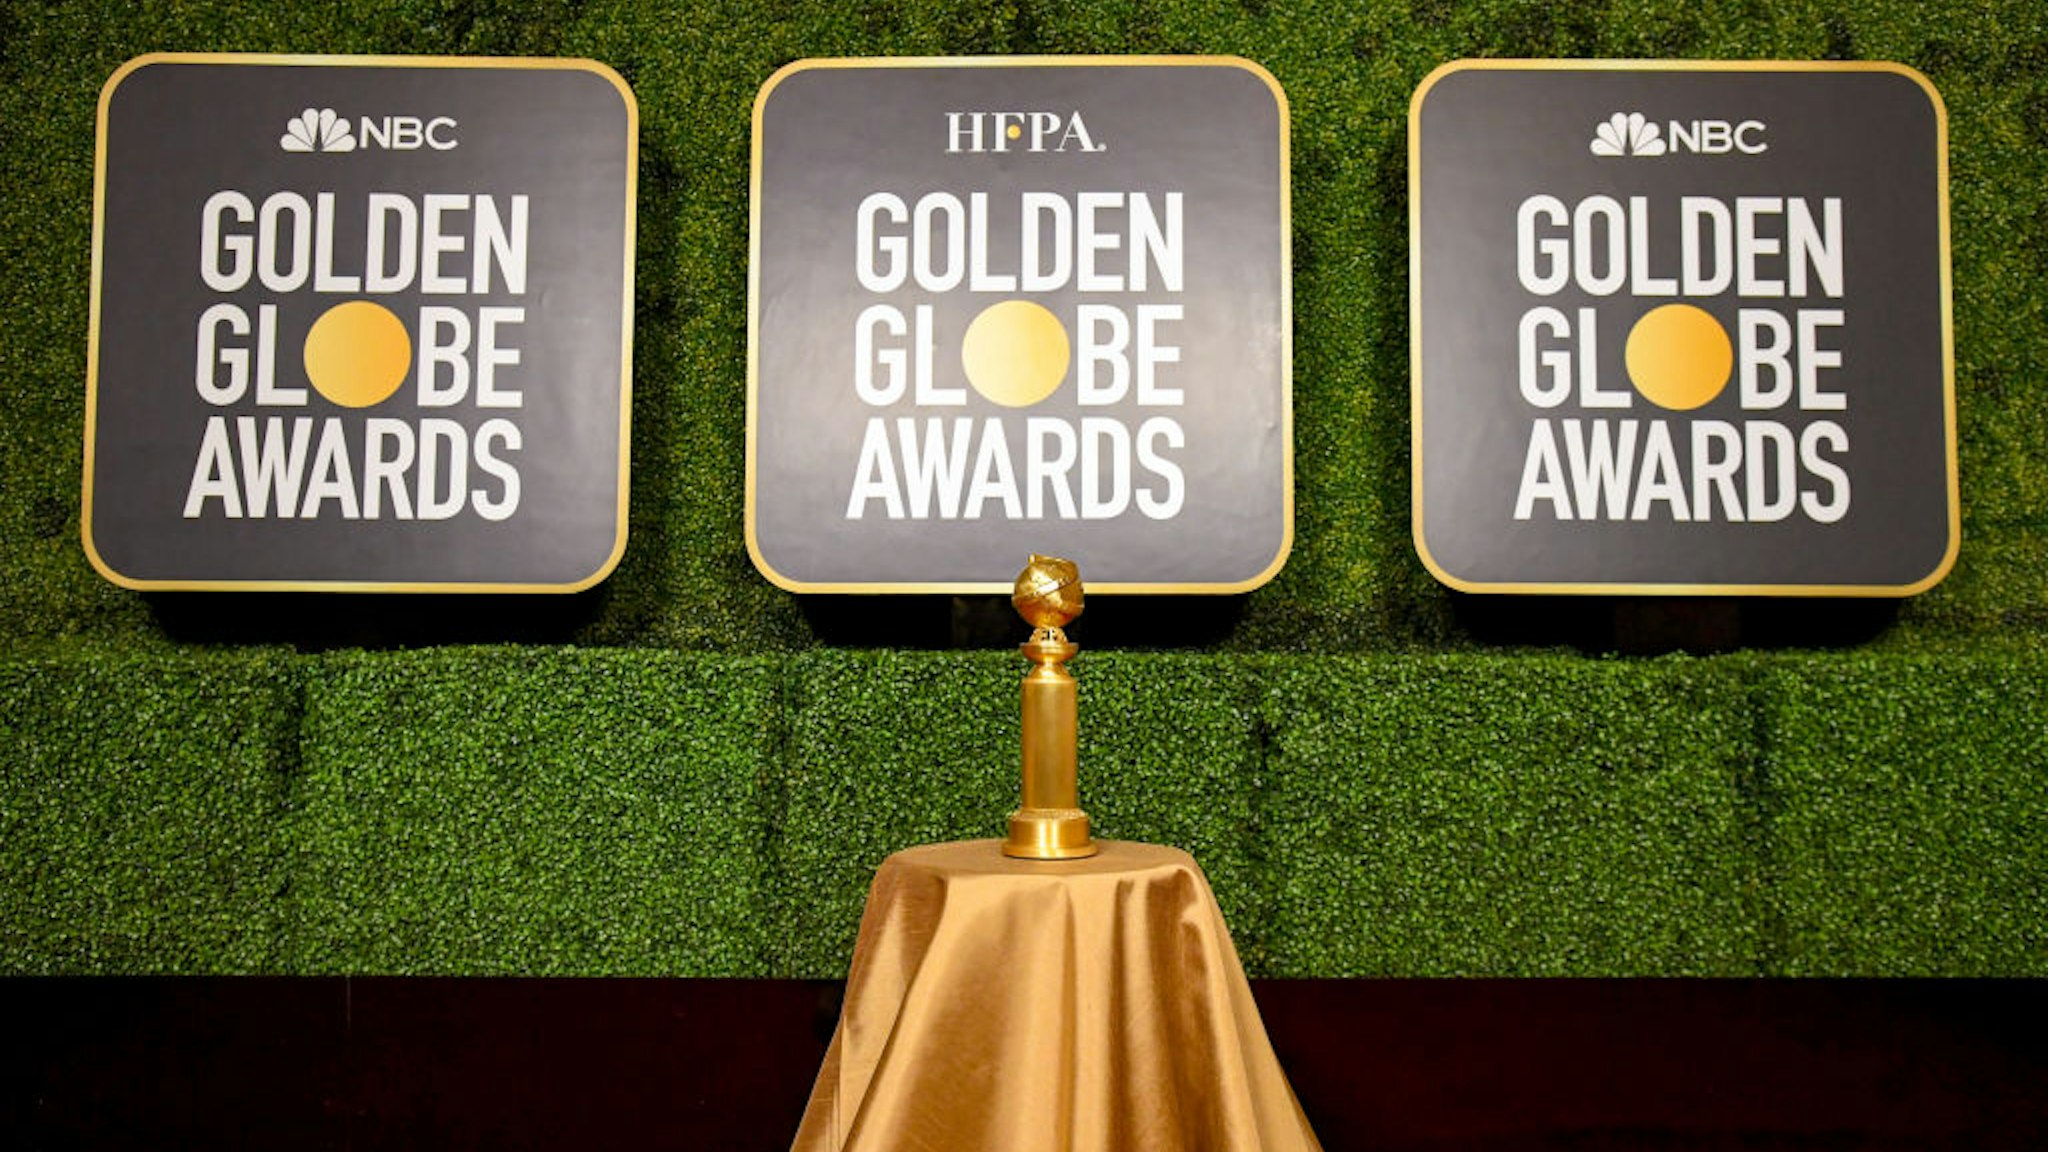 A view of the Golden Globe Trophy on display during the 78th Annual Golden Globe® Awards aired on February 28th, 2021 at The Rainbow Room on February 27, 2021 in New York City.